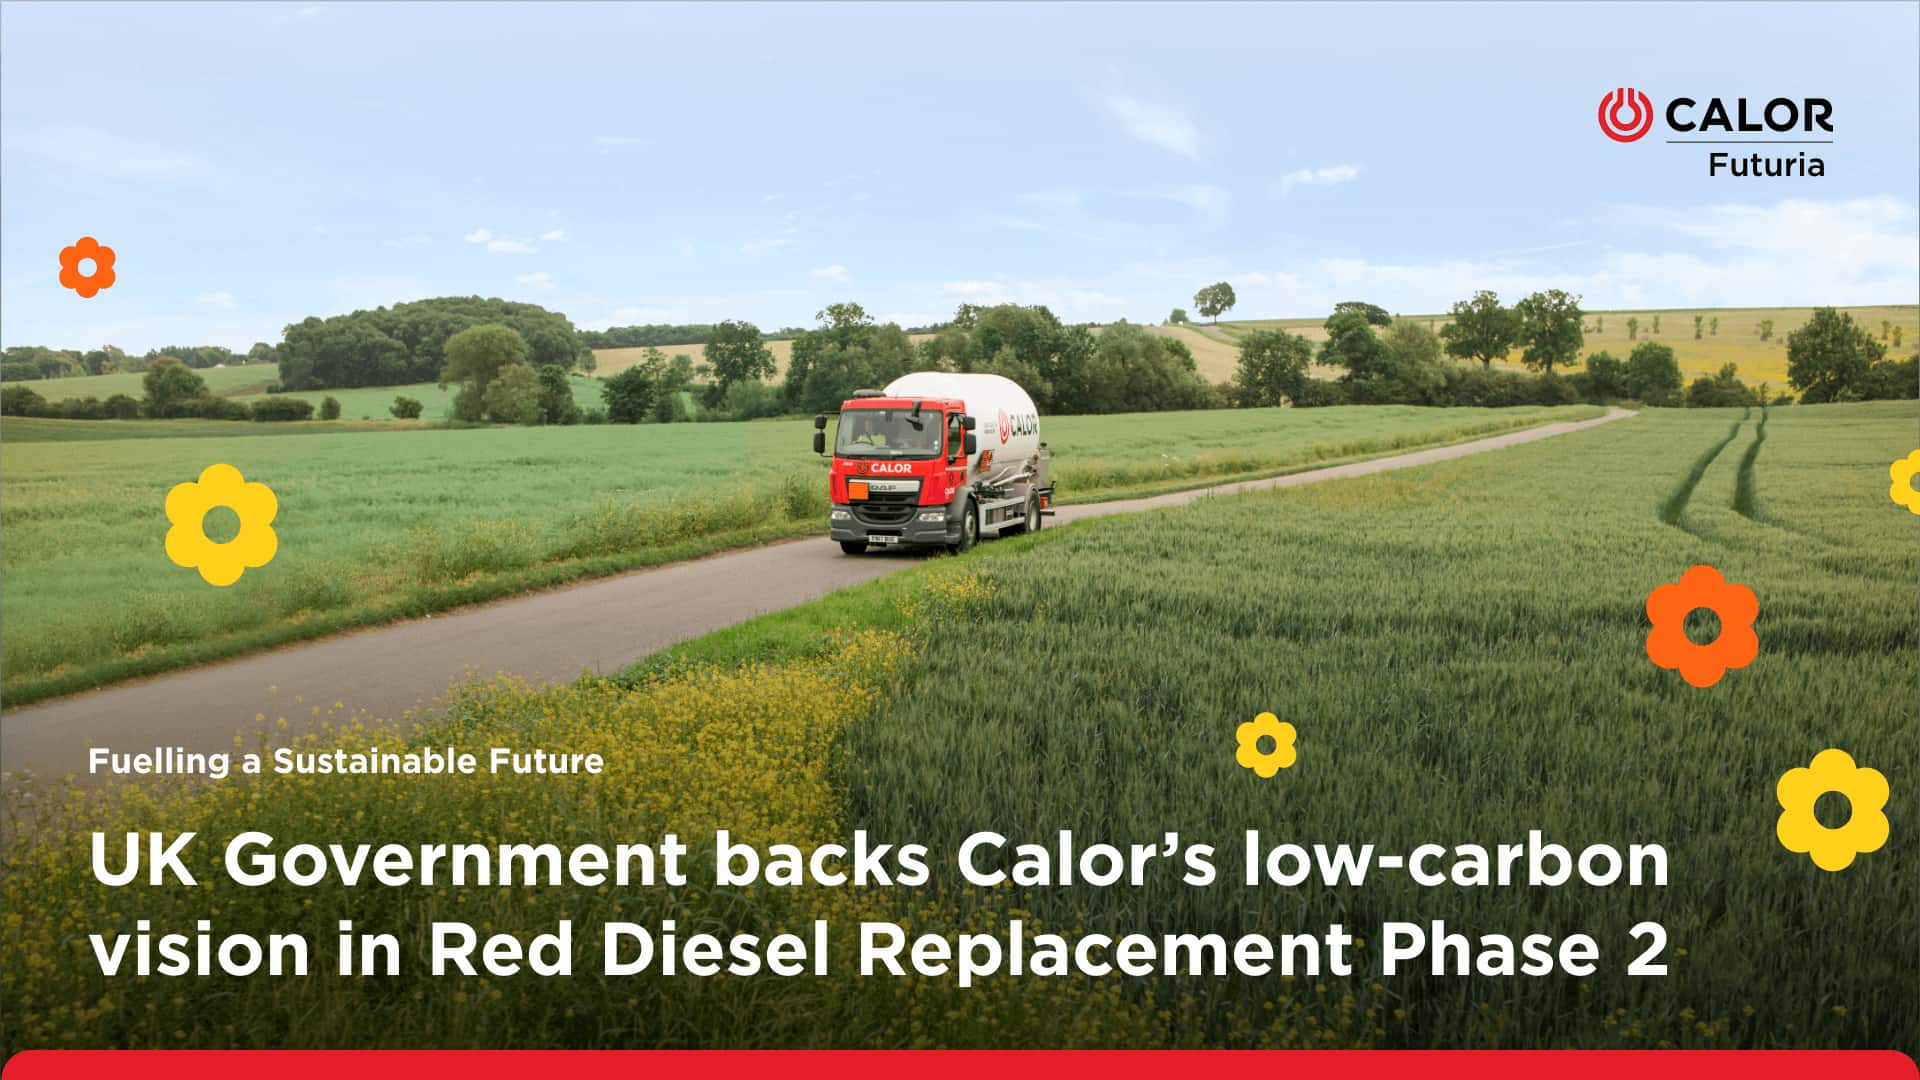 Calor vehicle driving through the countryside with text about the governments backing or Calor's low-carbon vision